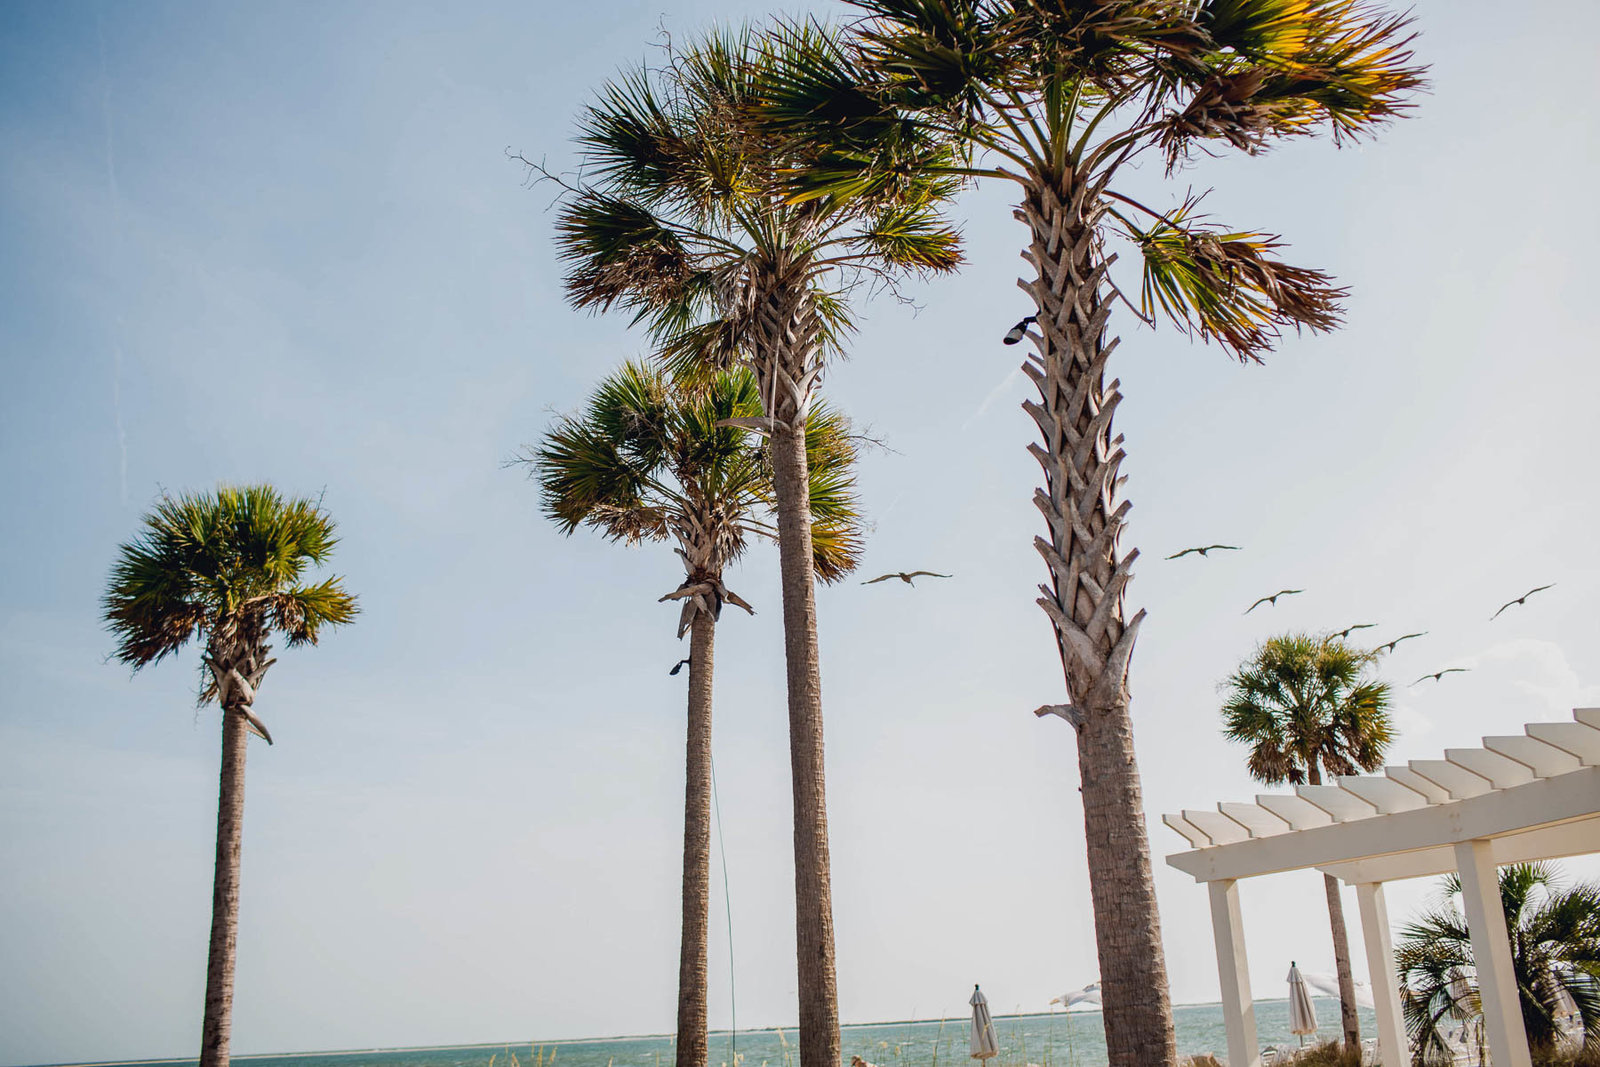 Ceremony is set up by palm trees, Seabrook Island Club, Charleston Wedding Photography.